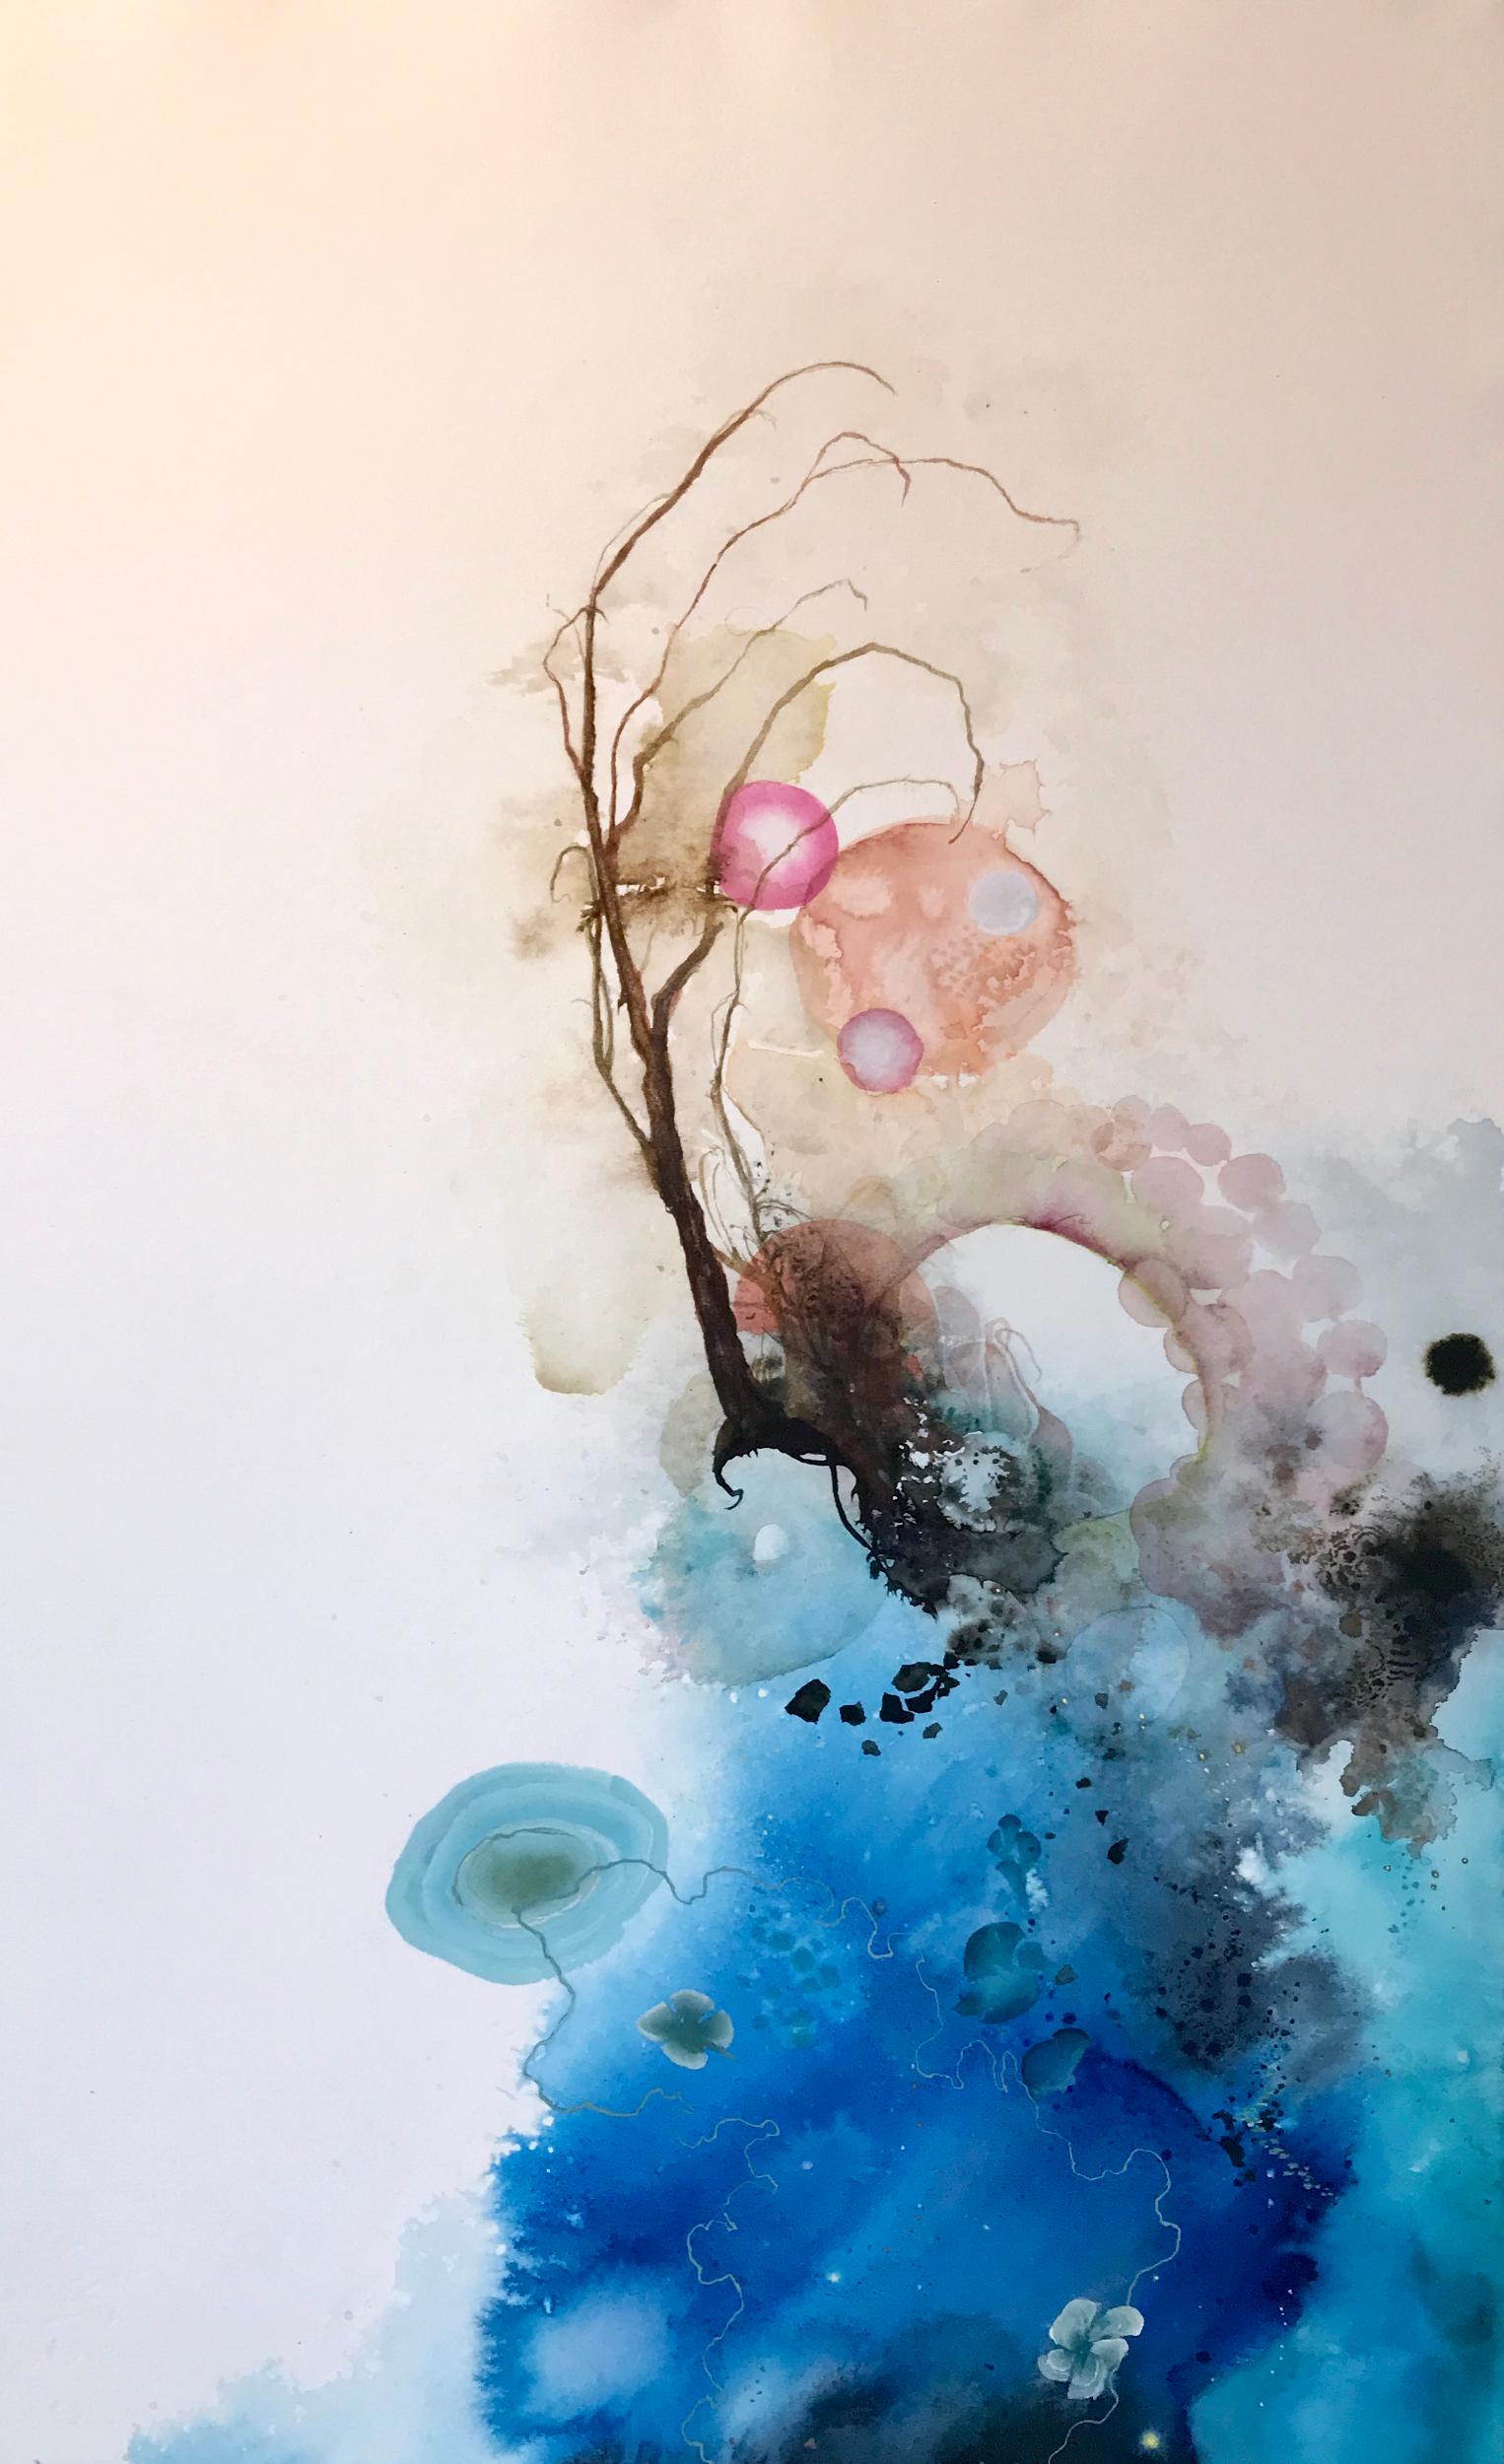 Grayson Chandler Abstract Drawing - "Anemone Study", Watercolor, Abstract, Contemporary Art, Emerging Artist